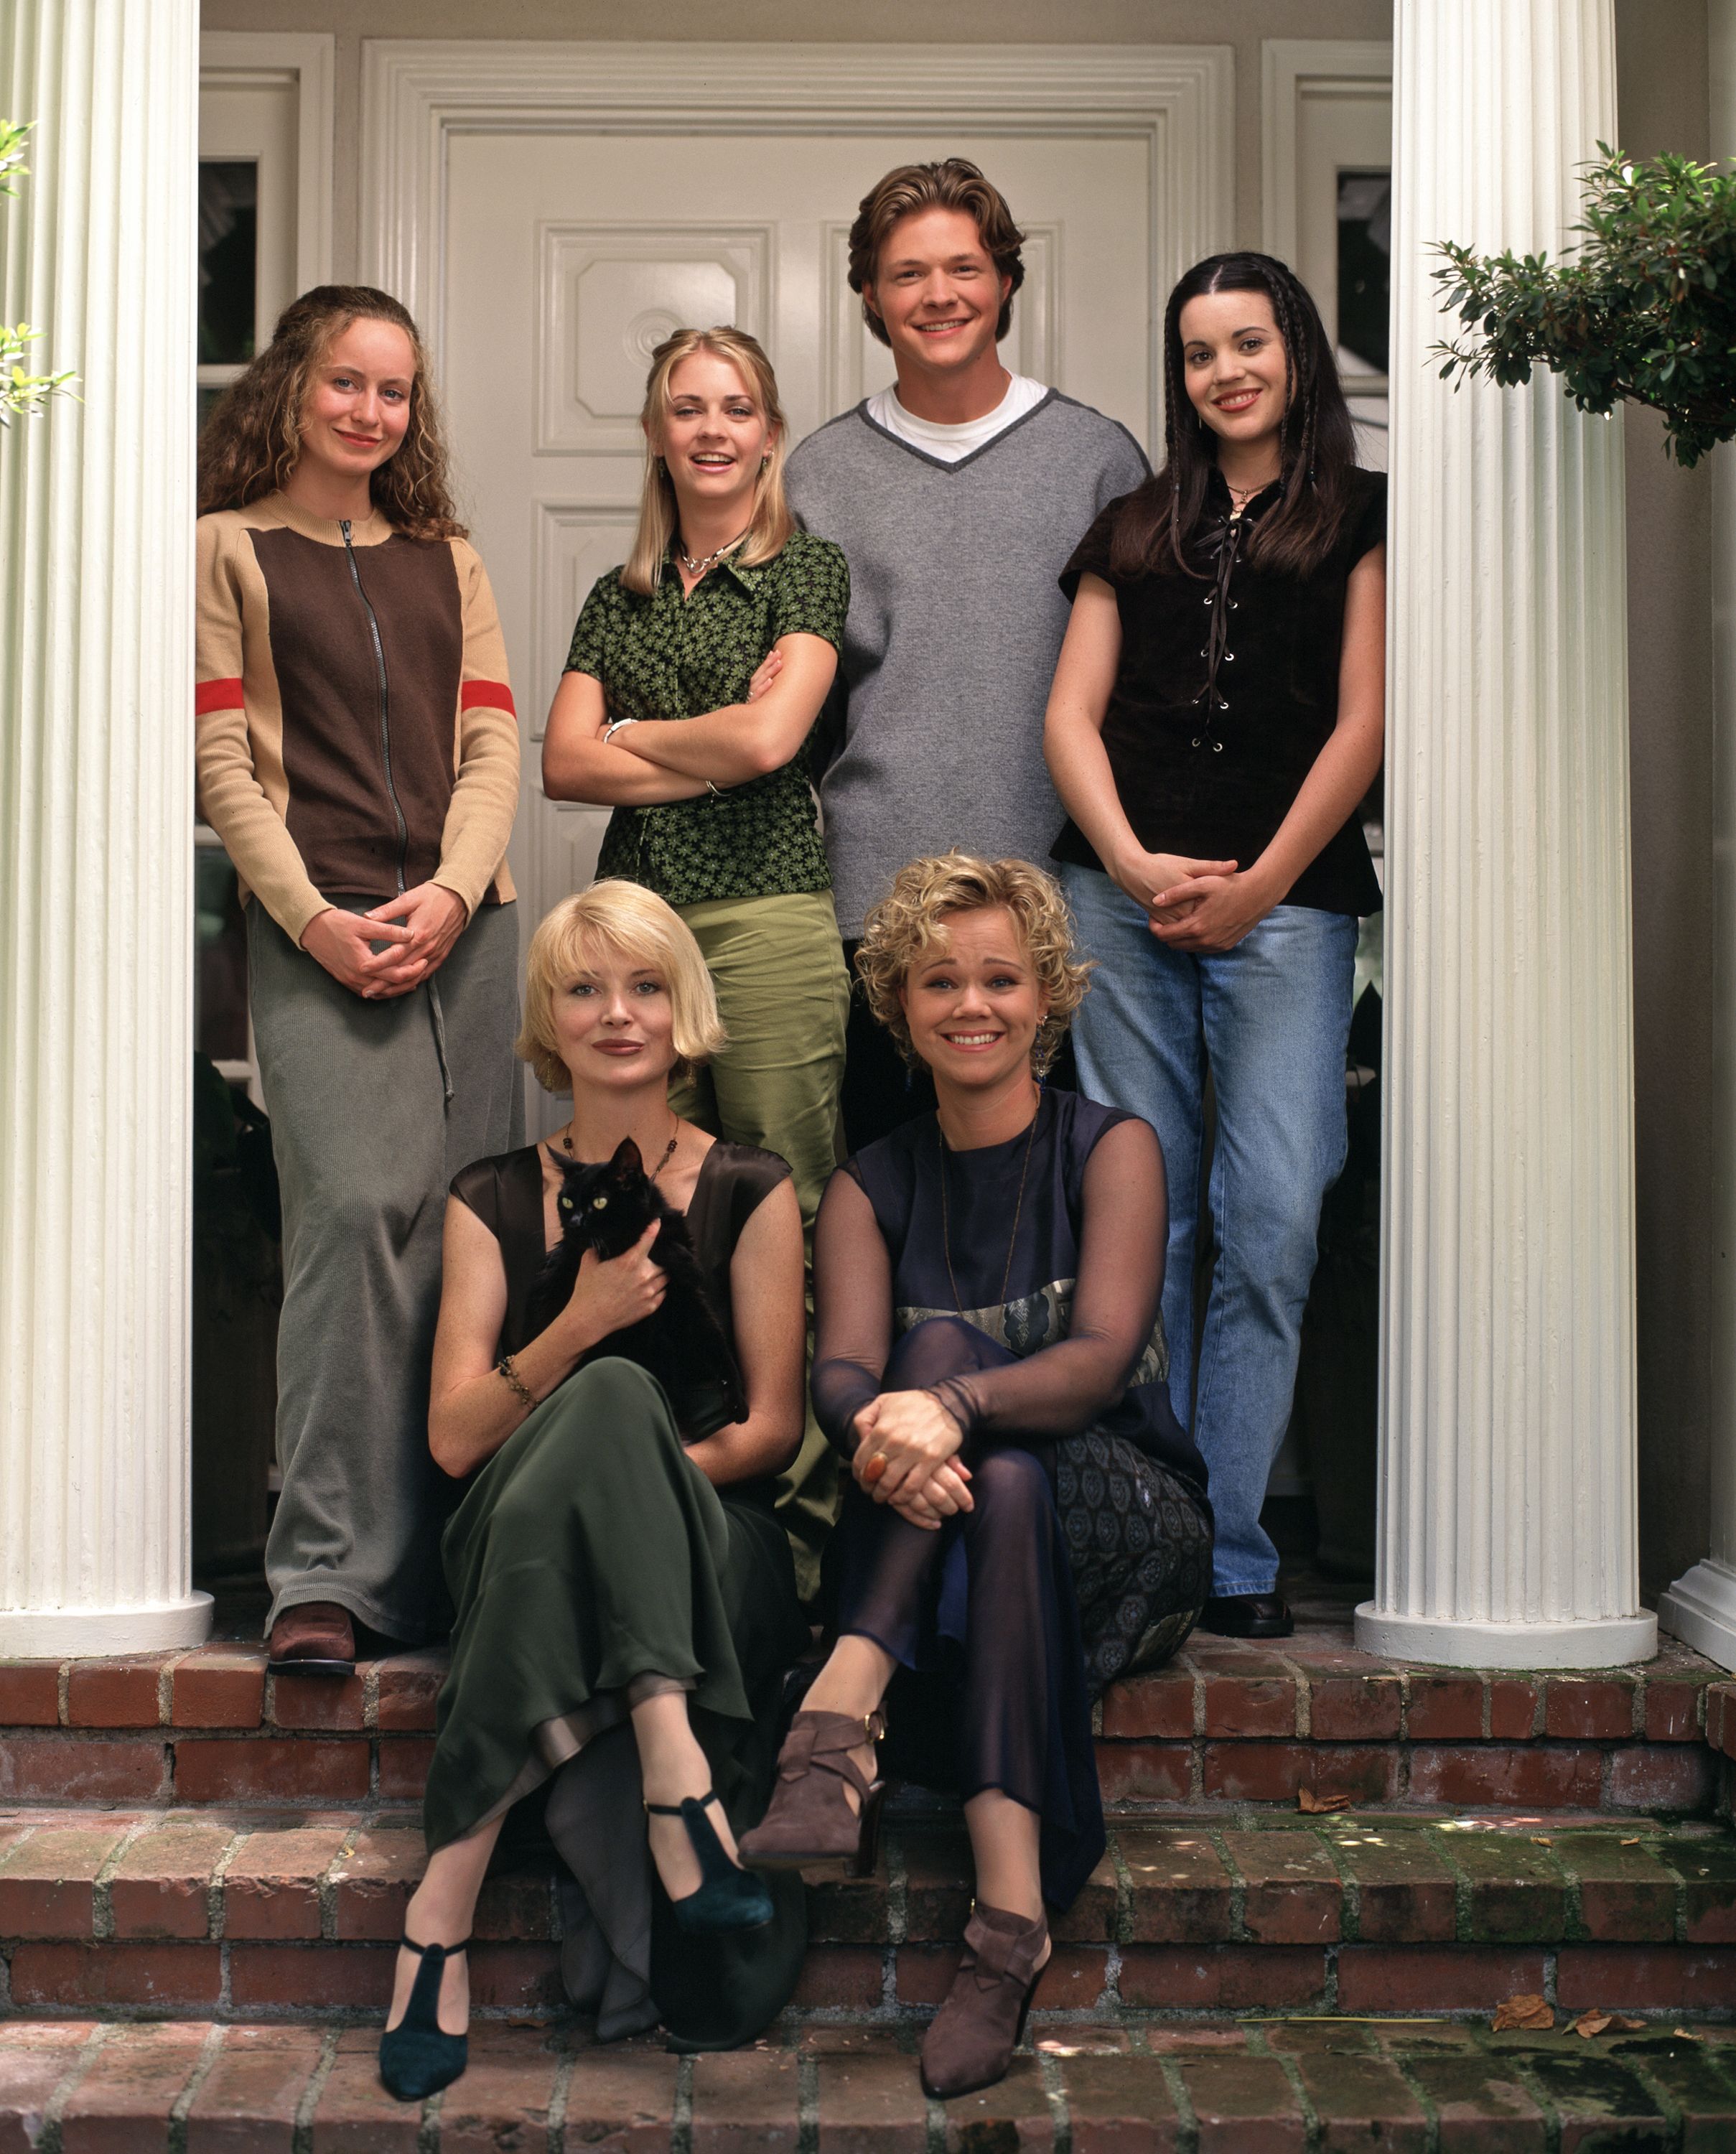 Cast of Sabrina the Teenage Witch: Where are they now?